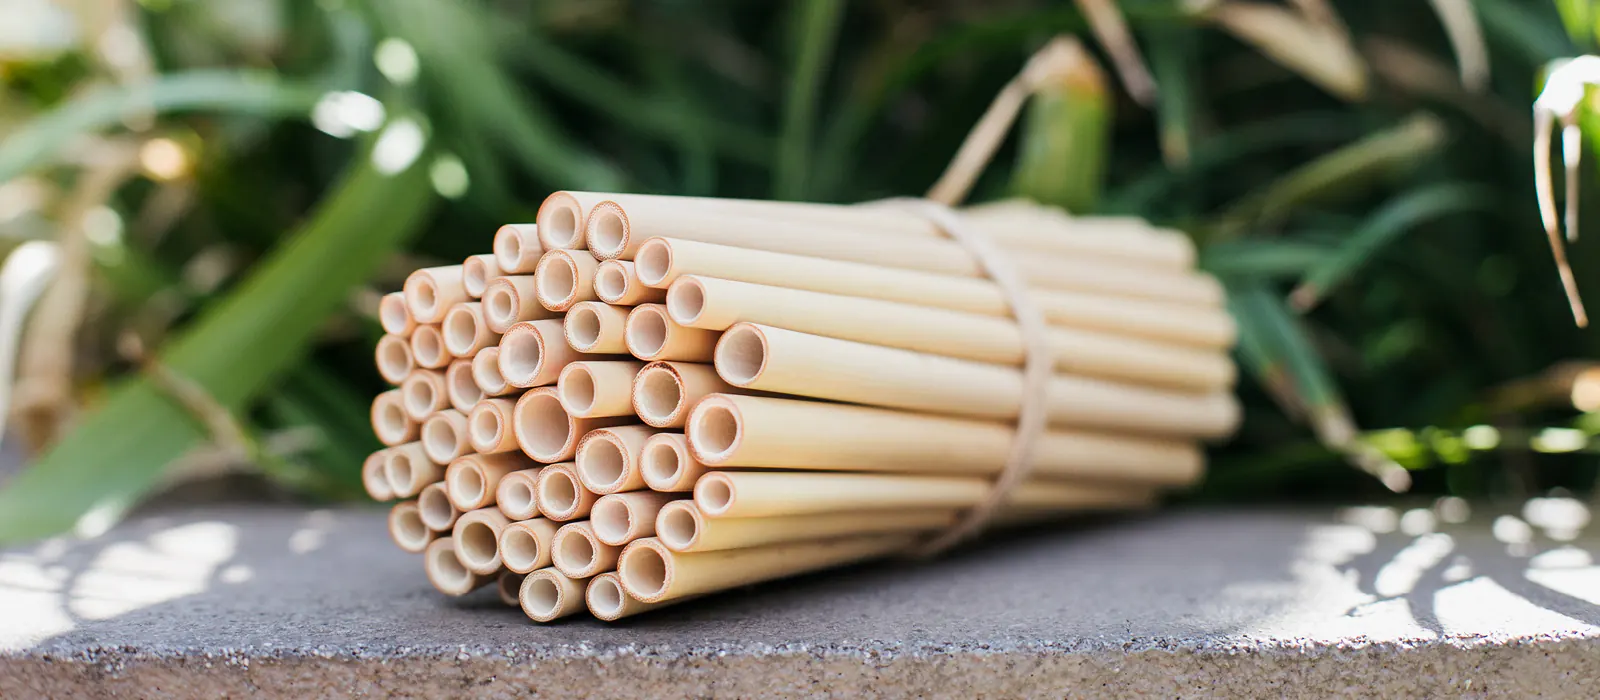 A bundle of Bamboo Straws